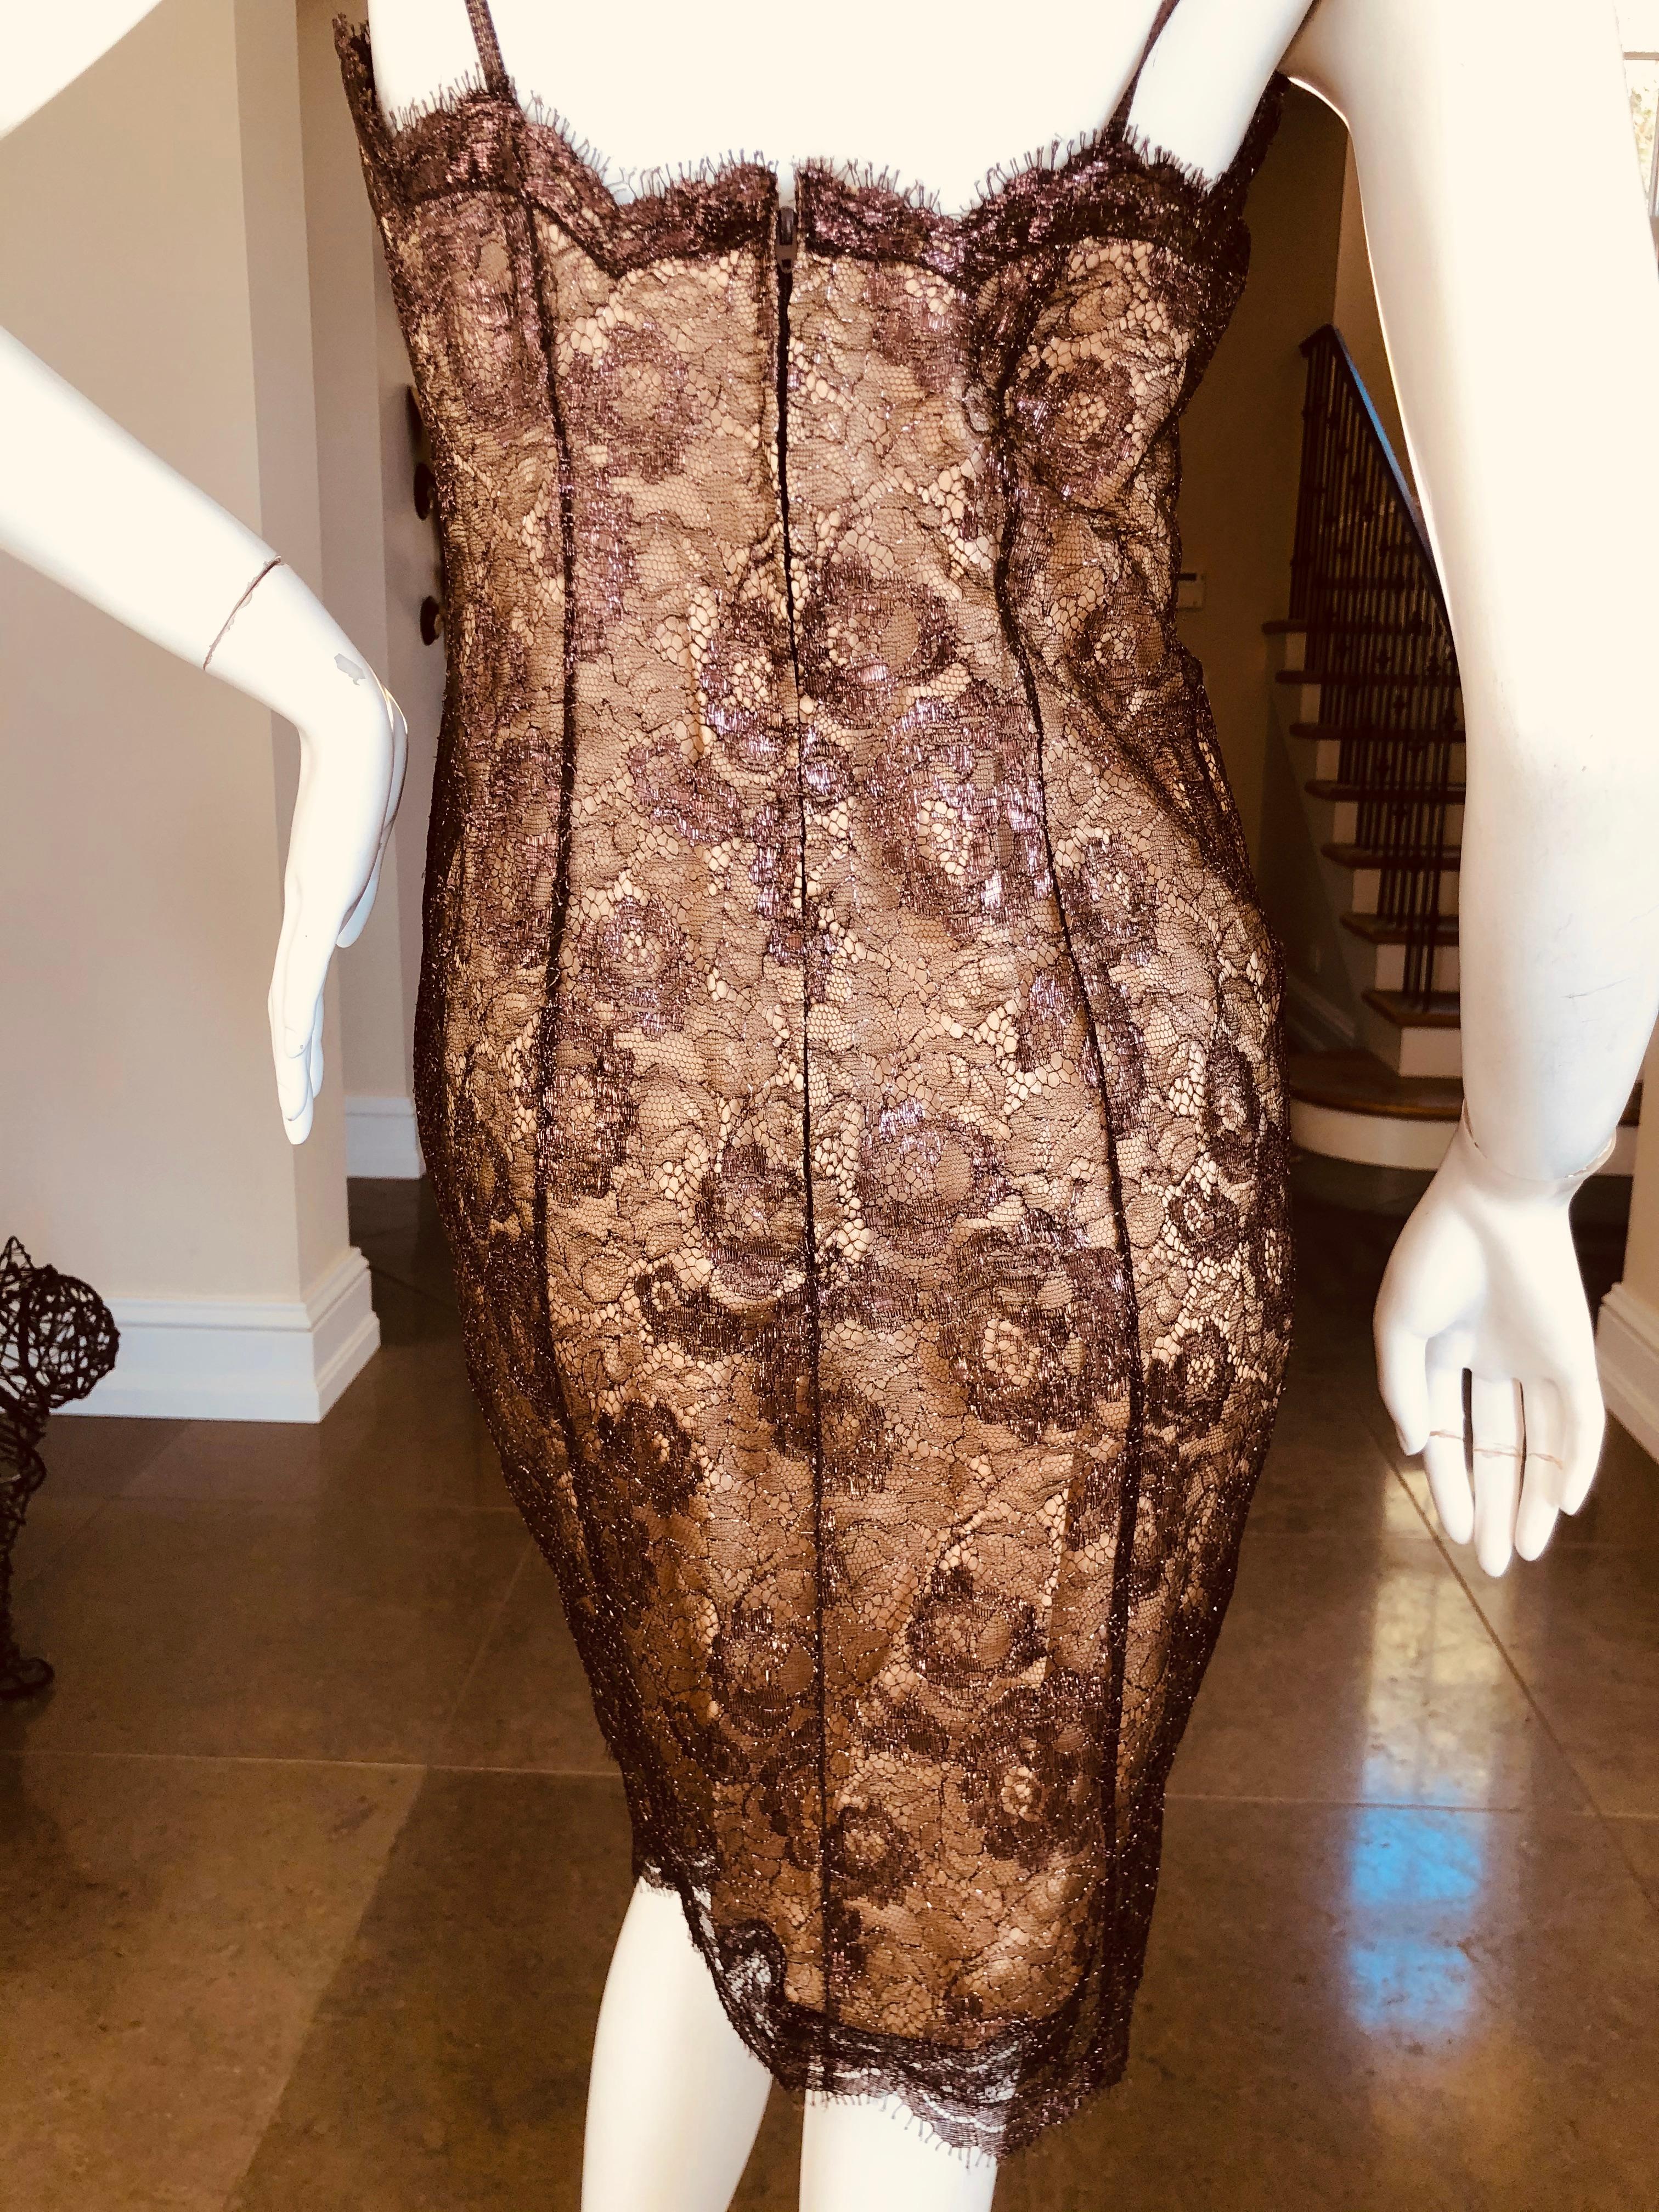 Women's Geoffrey Beene Vintage Metallic Accented Lace Dress with Scallop Edges and Belt For Sale